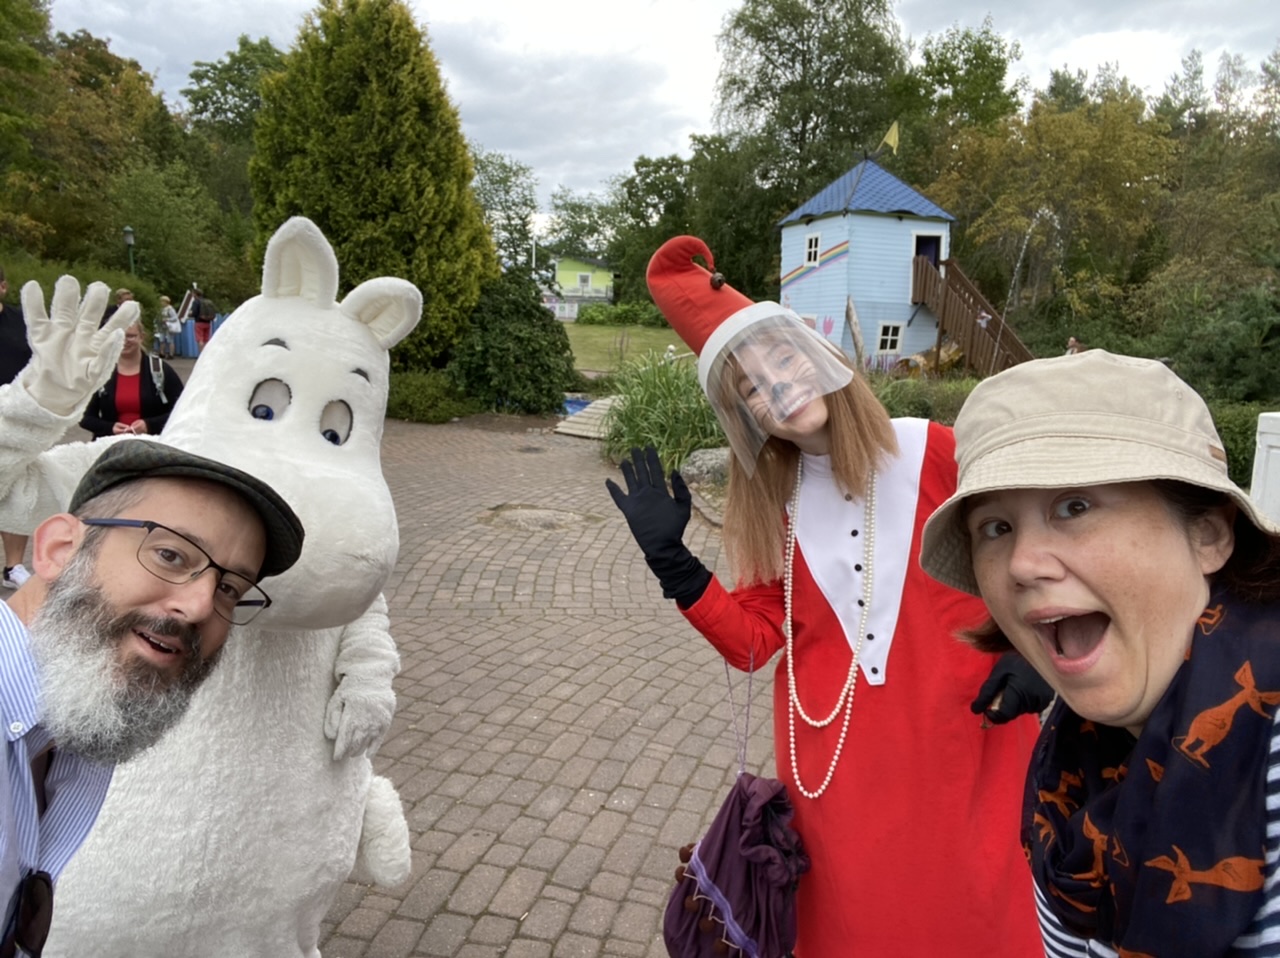 Moomin and the Fillyjonk